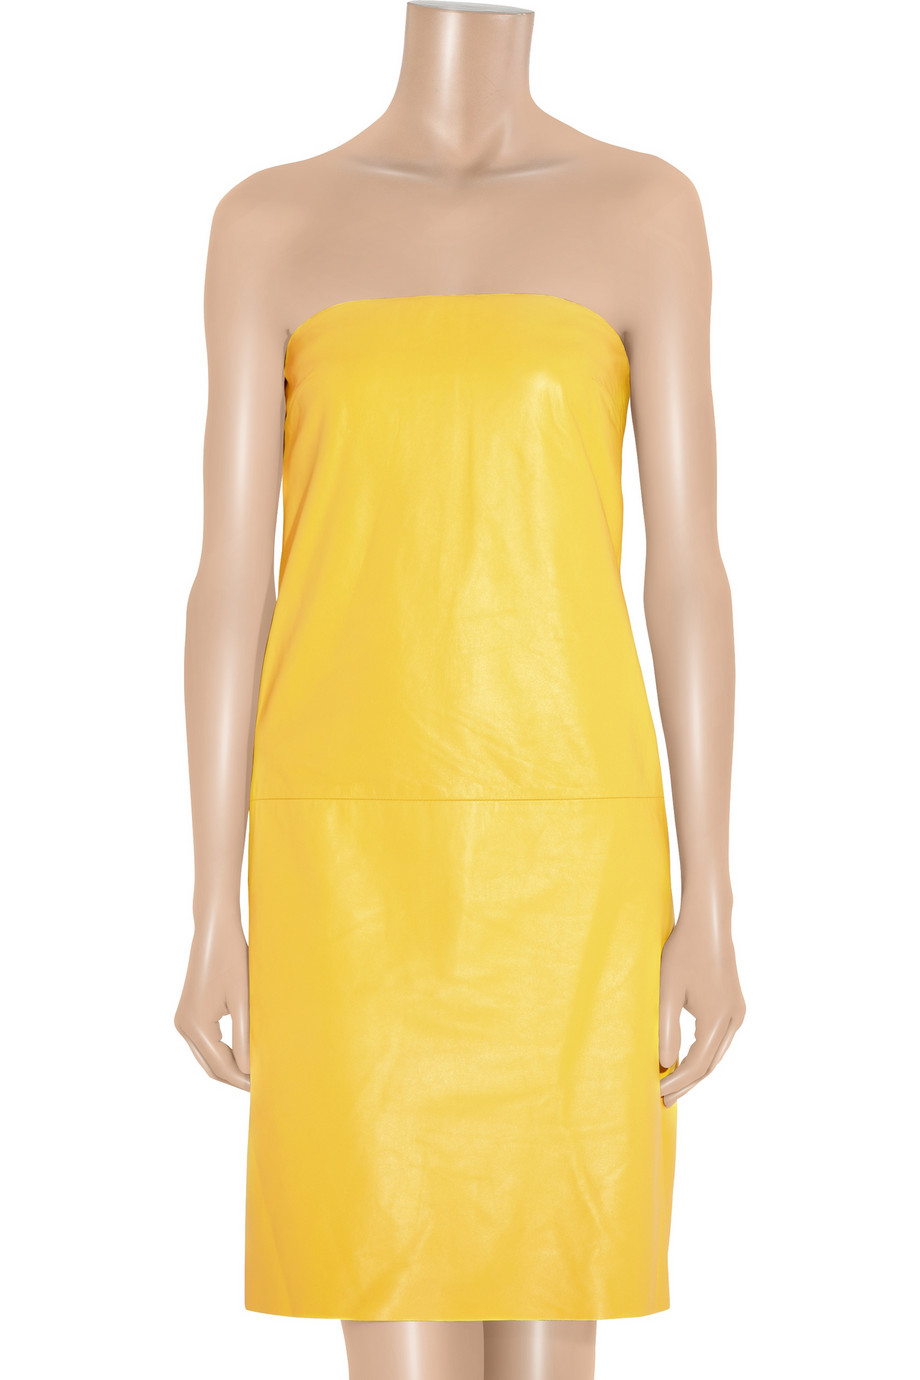 Lyst - Ralph Lauren Collection Eugenia Strapless Leather Dress in Yellow